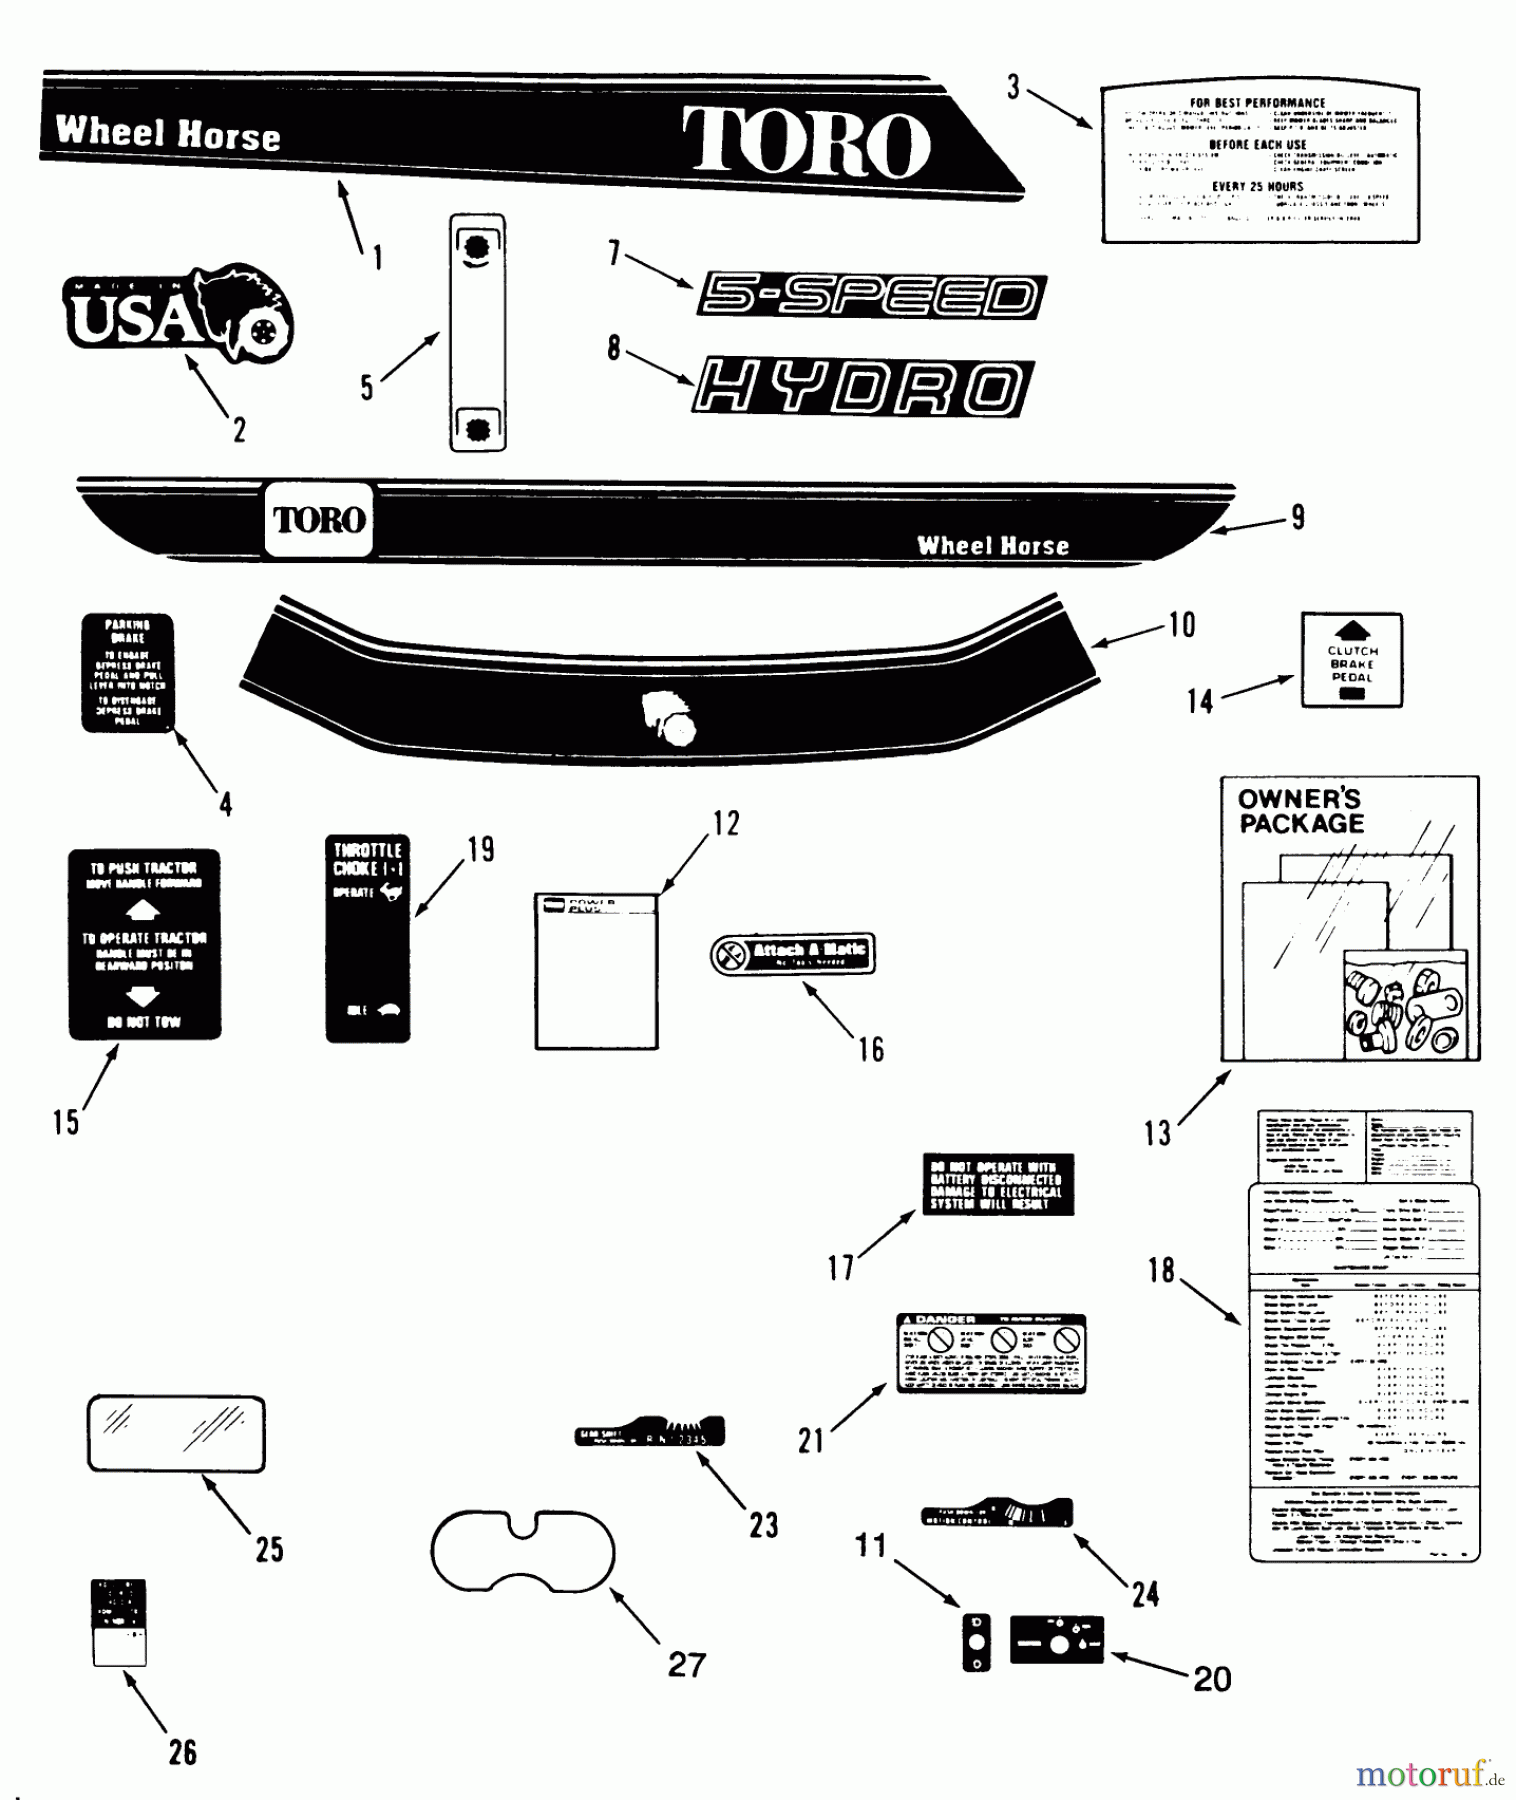  Toro Neu Mowers, Lawn & Garden Tractor Seite 1 32-12B5A3 (212-5) - Toro 212-5 Tractor, 1991 (1000001-1999999) DECAL & MISCELLANEOUS PARTS ASSEMBLY